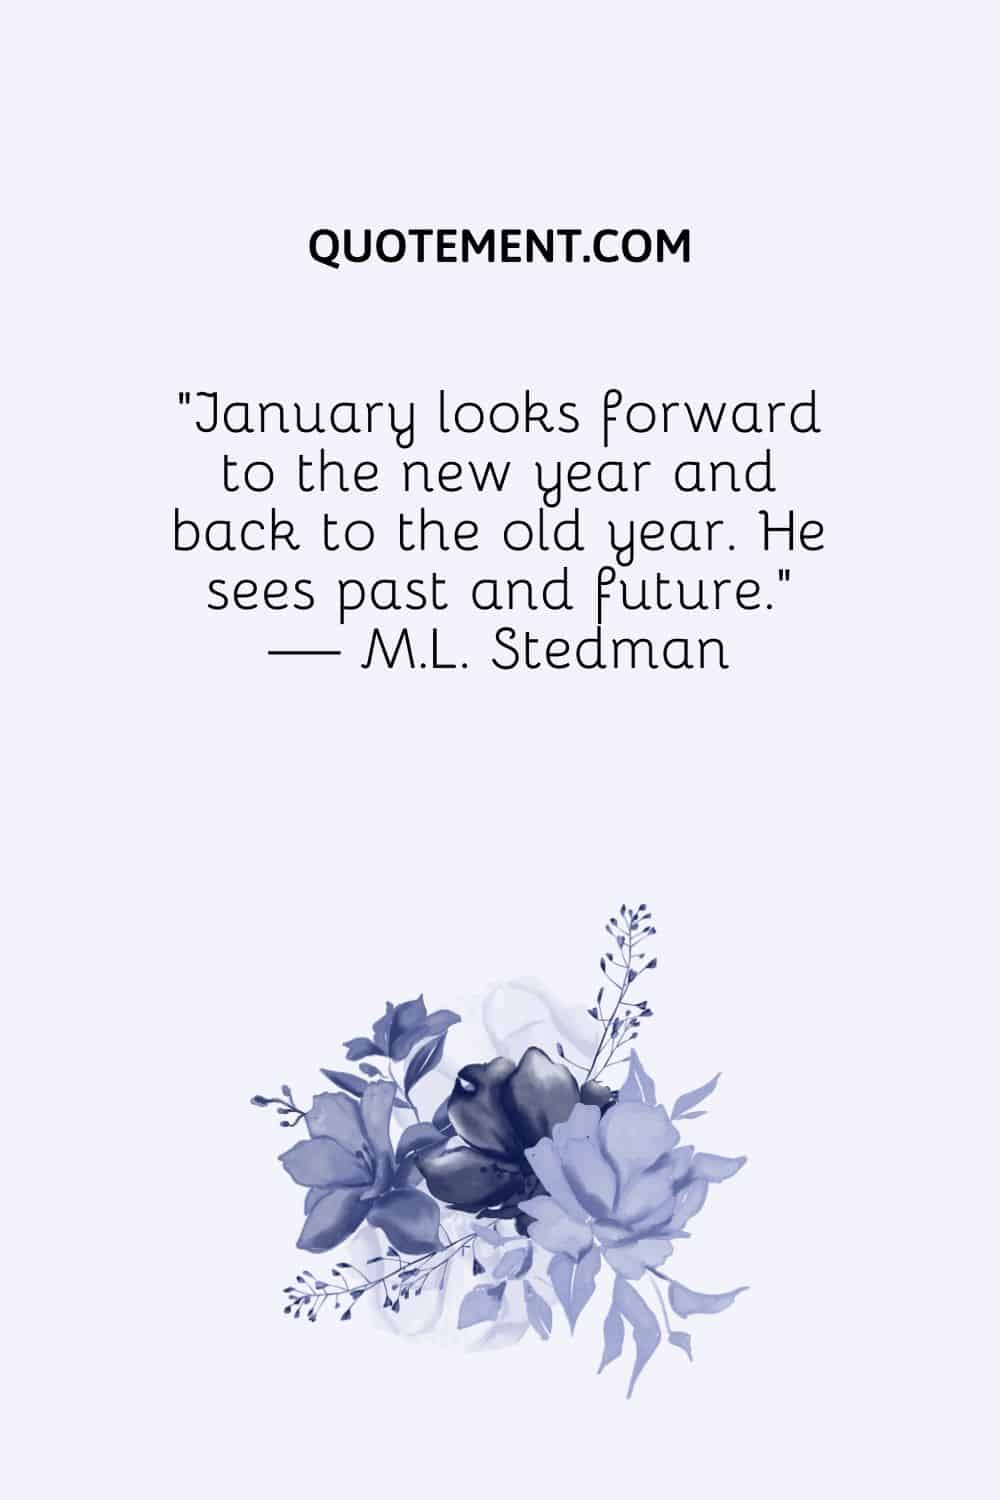 January looks forward to the new year and back to the old year. He sees past and future